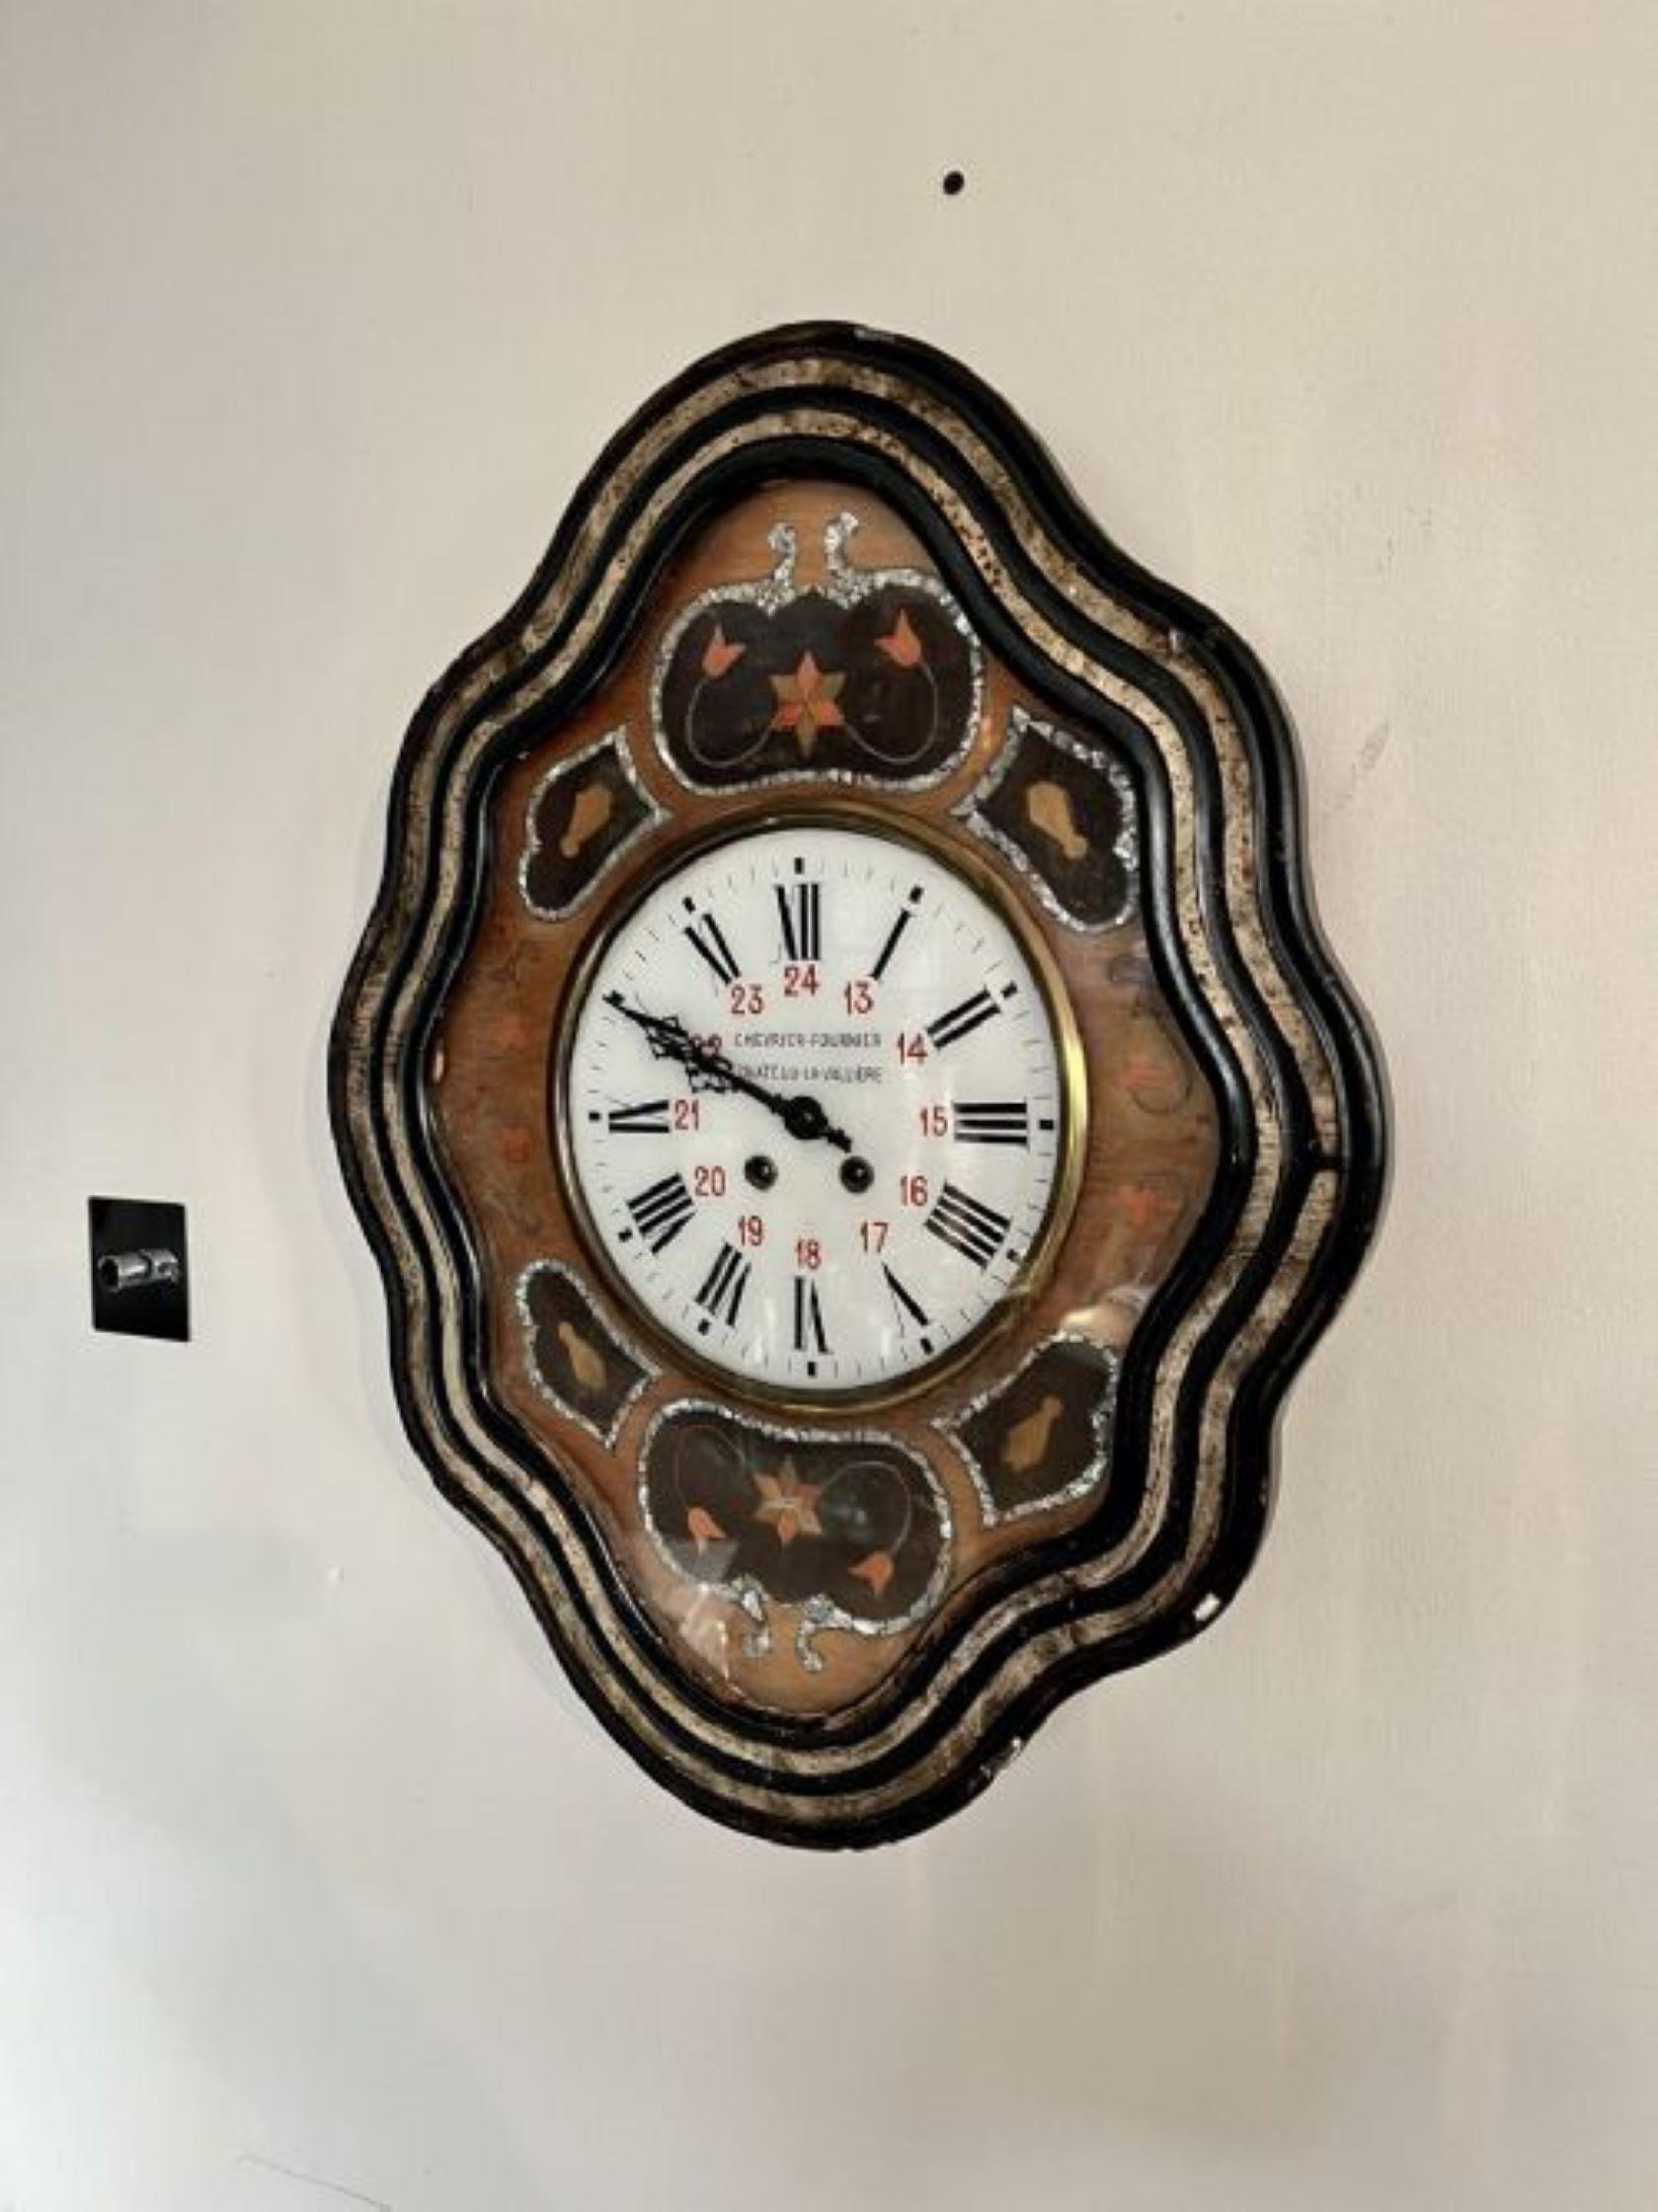 Antique Victorian quality French wall clock in an attractive walnut and agonised shaped case having a fantastic inlaid decorated ornate circular porcelain dial with the original hands, eight day movement striking the hour and half hour on a gong.